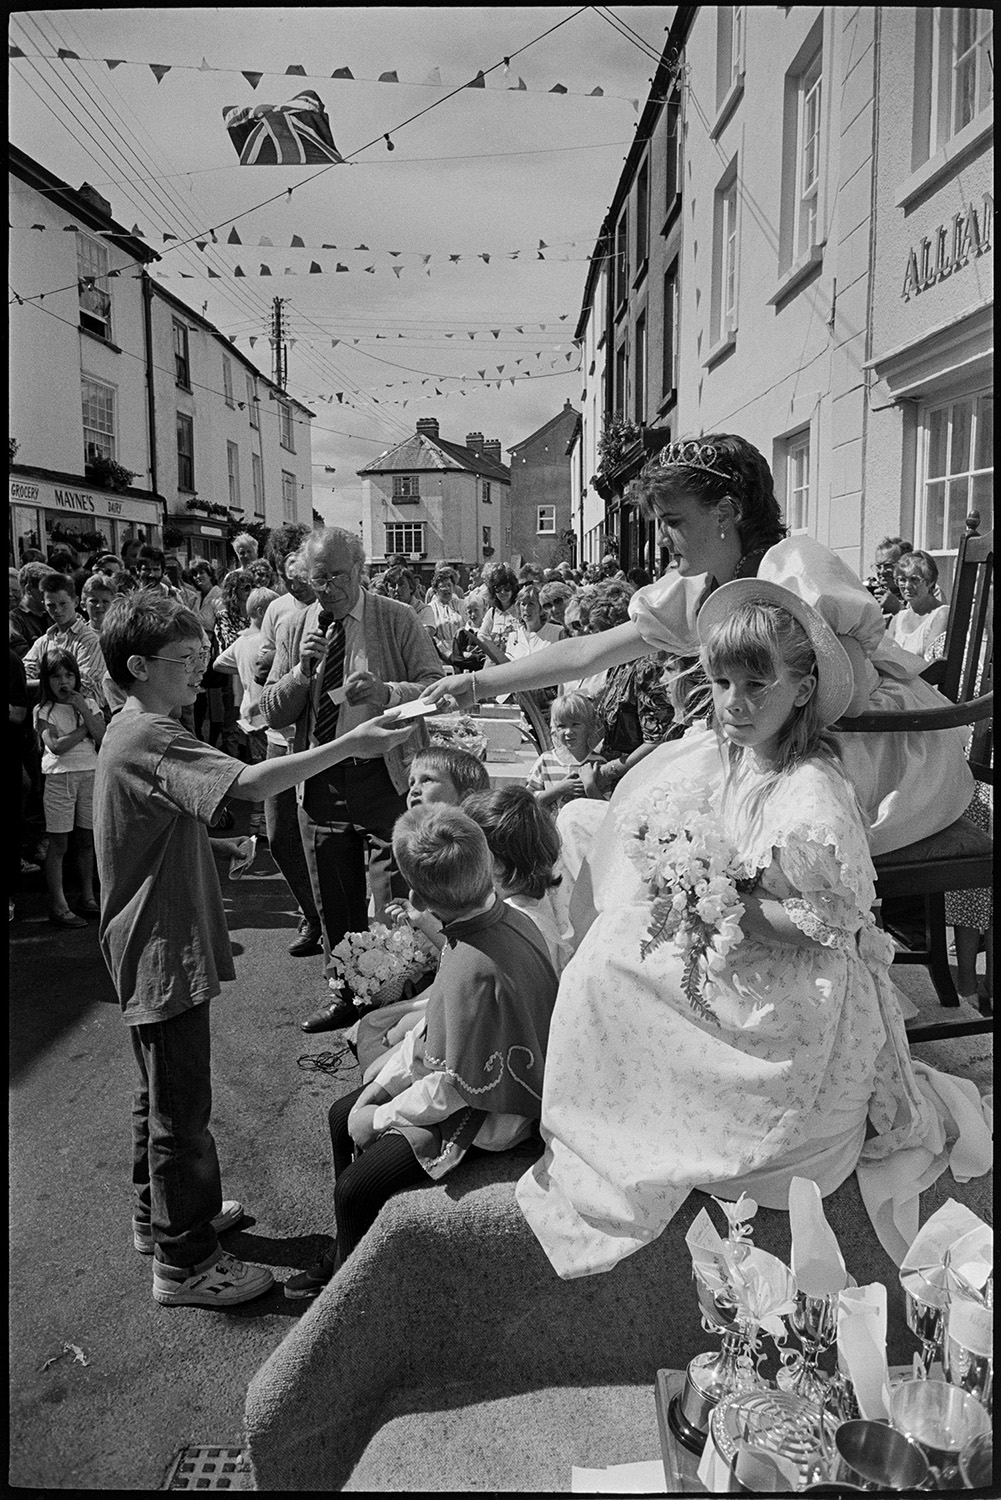 Fair, display of flowers and produce, fancy dress parade in street. 
[The Chulmleigh Fair Queen handing out  a prize to a boy in a street decorated with bunting in Chulmleigh. The Fair Queen and her attendants are sat on a podium in the street and a table of silver cups are visible in the foreground. A man is making announcements with a microphone and a crows is watching in the background.]